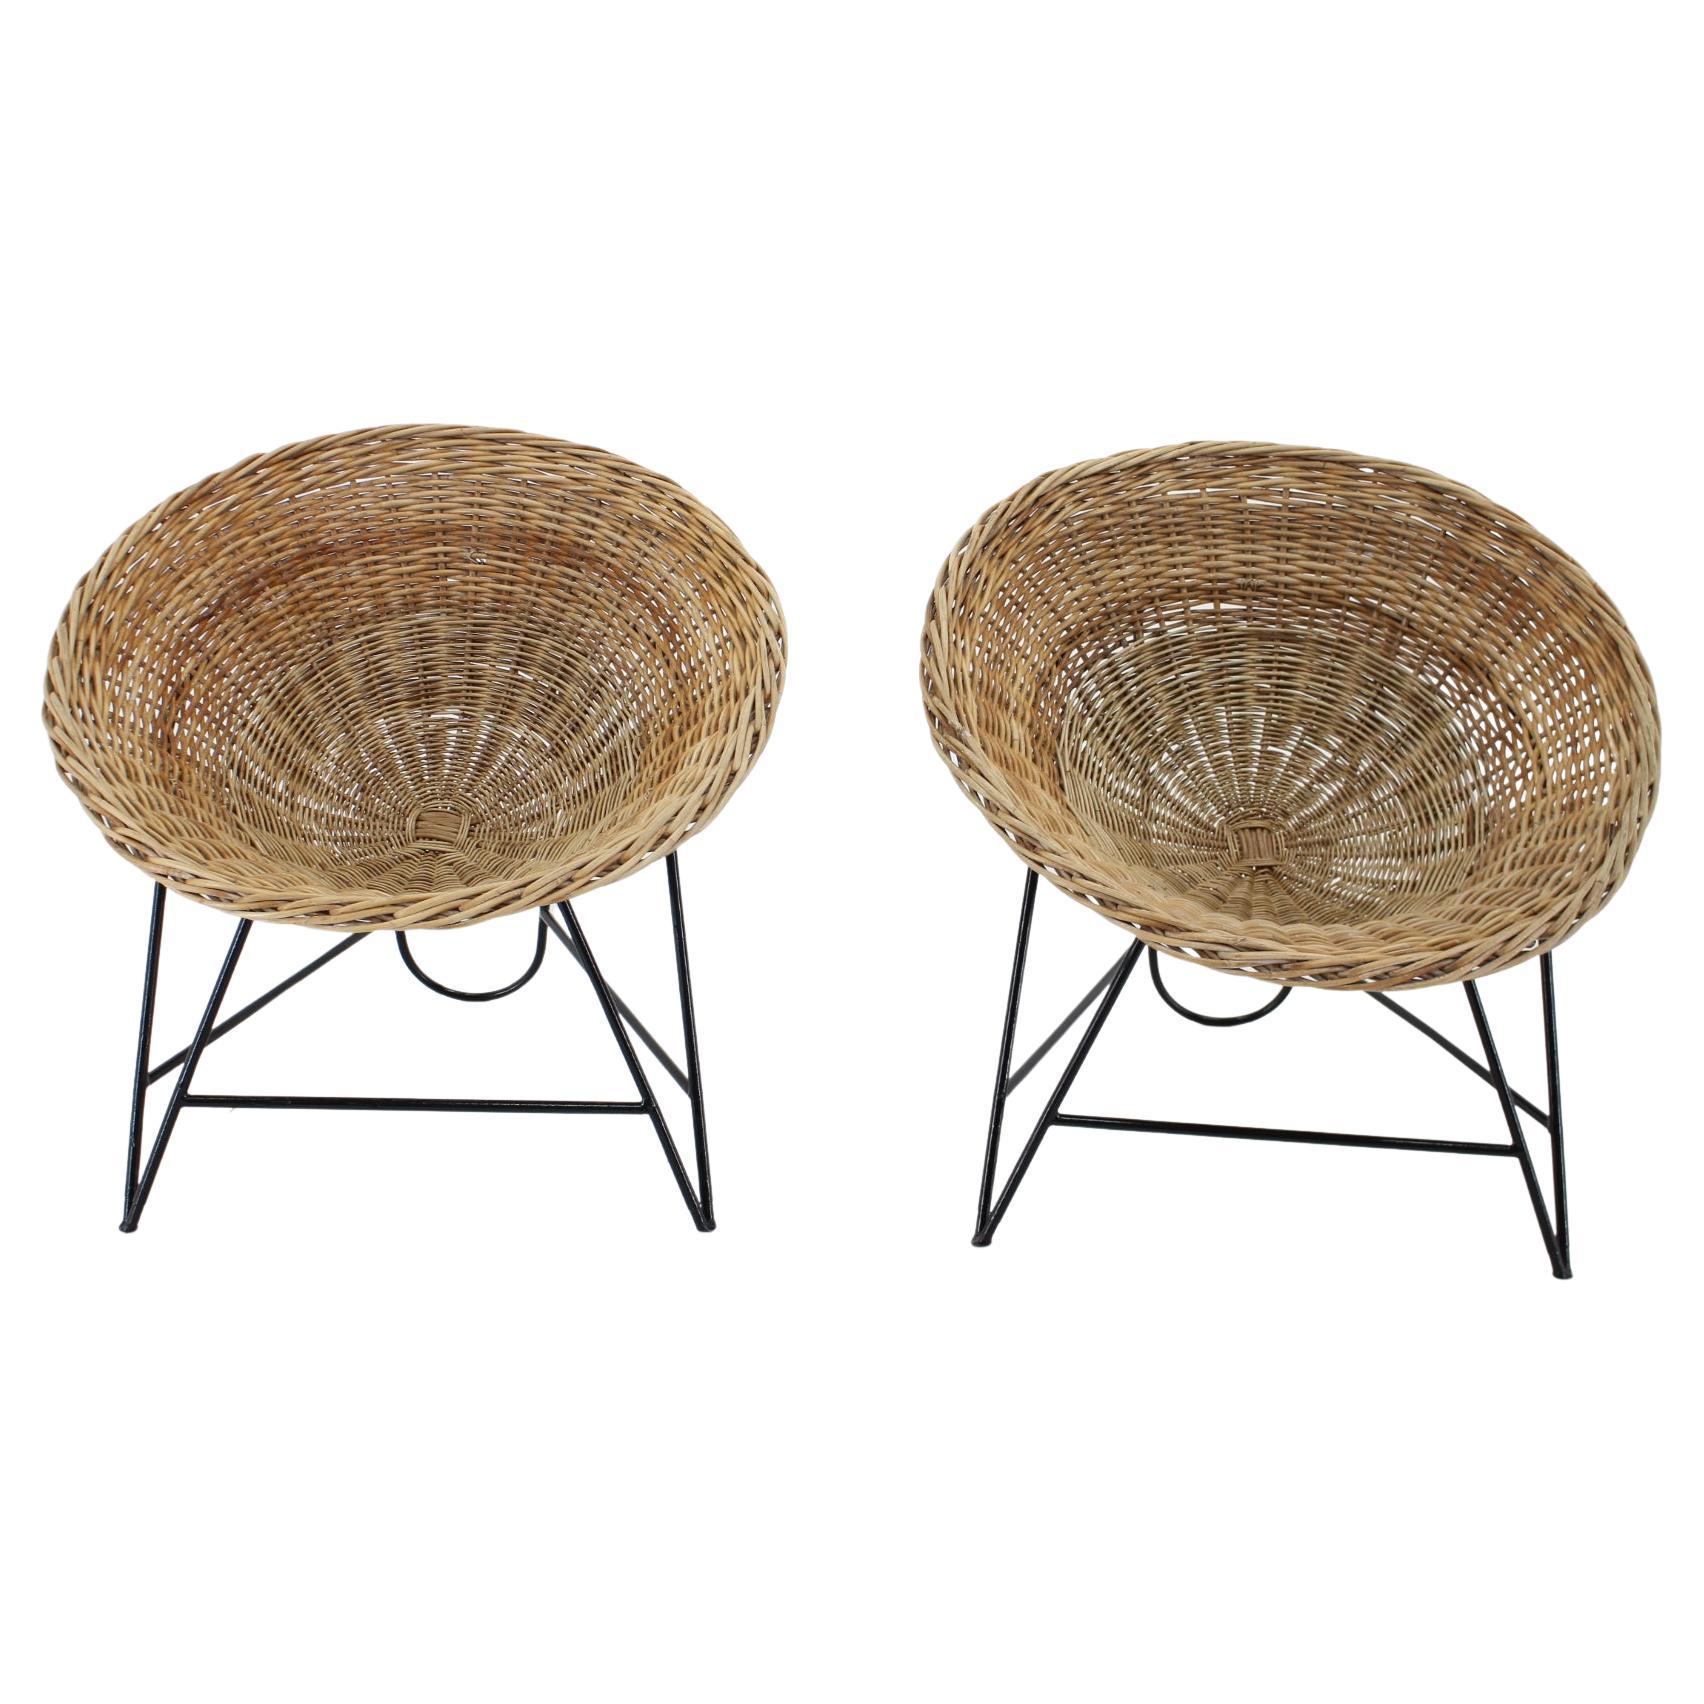 1960s Pair of Rattan Woven Basket Chair with Hairpin Legs For Sale